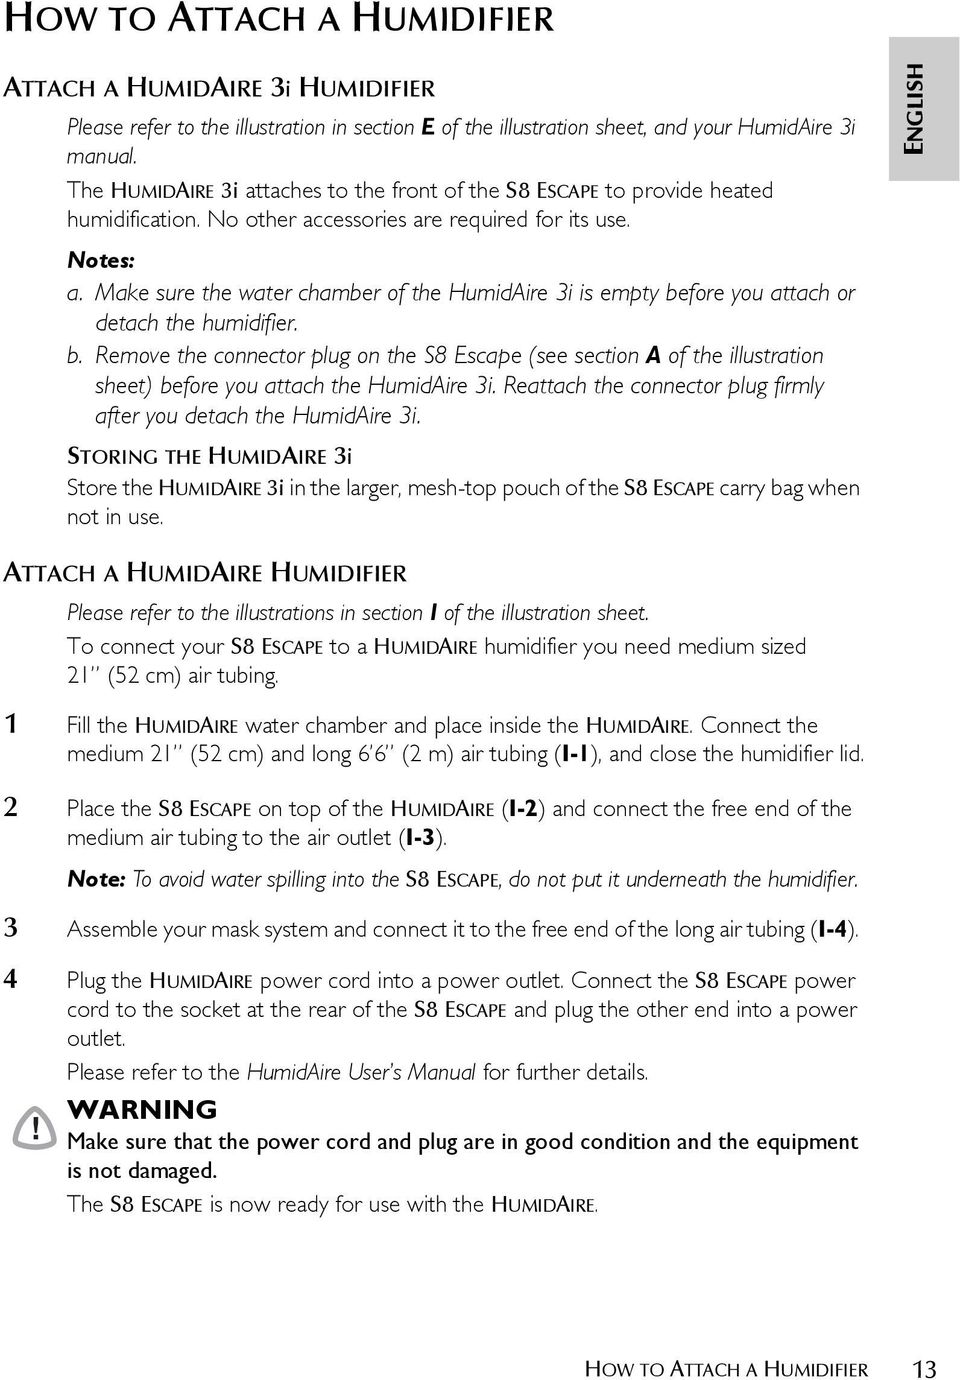 Make sure the water chamber of the HumidAire 3i is empty before you attach or detach the humidifier. b. Remove the connector plug on the S8 Escape (see section A of the illustration sheet) before you attach the HumidAire 3i.